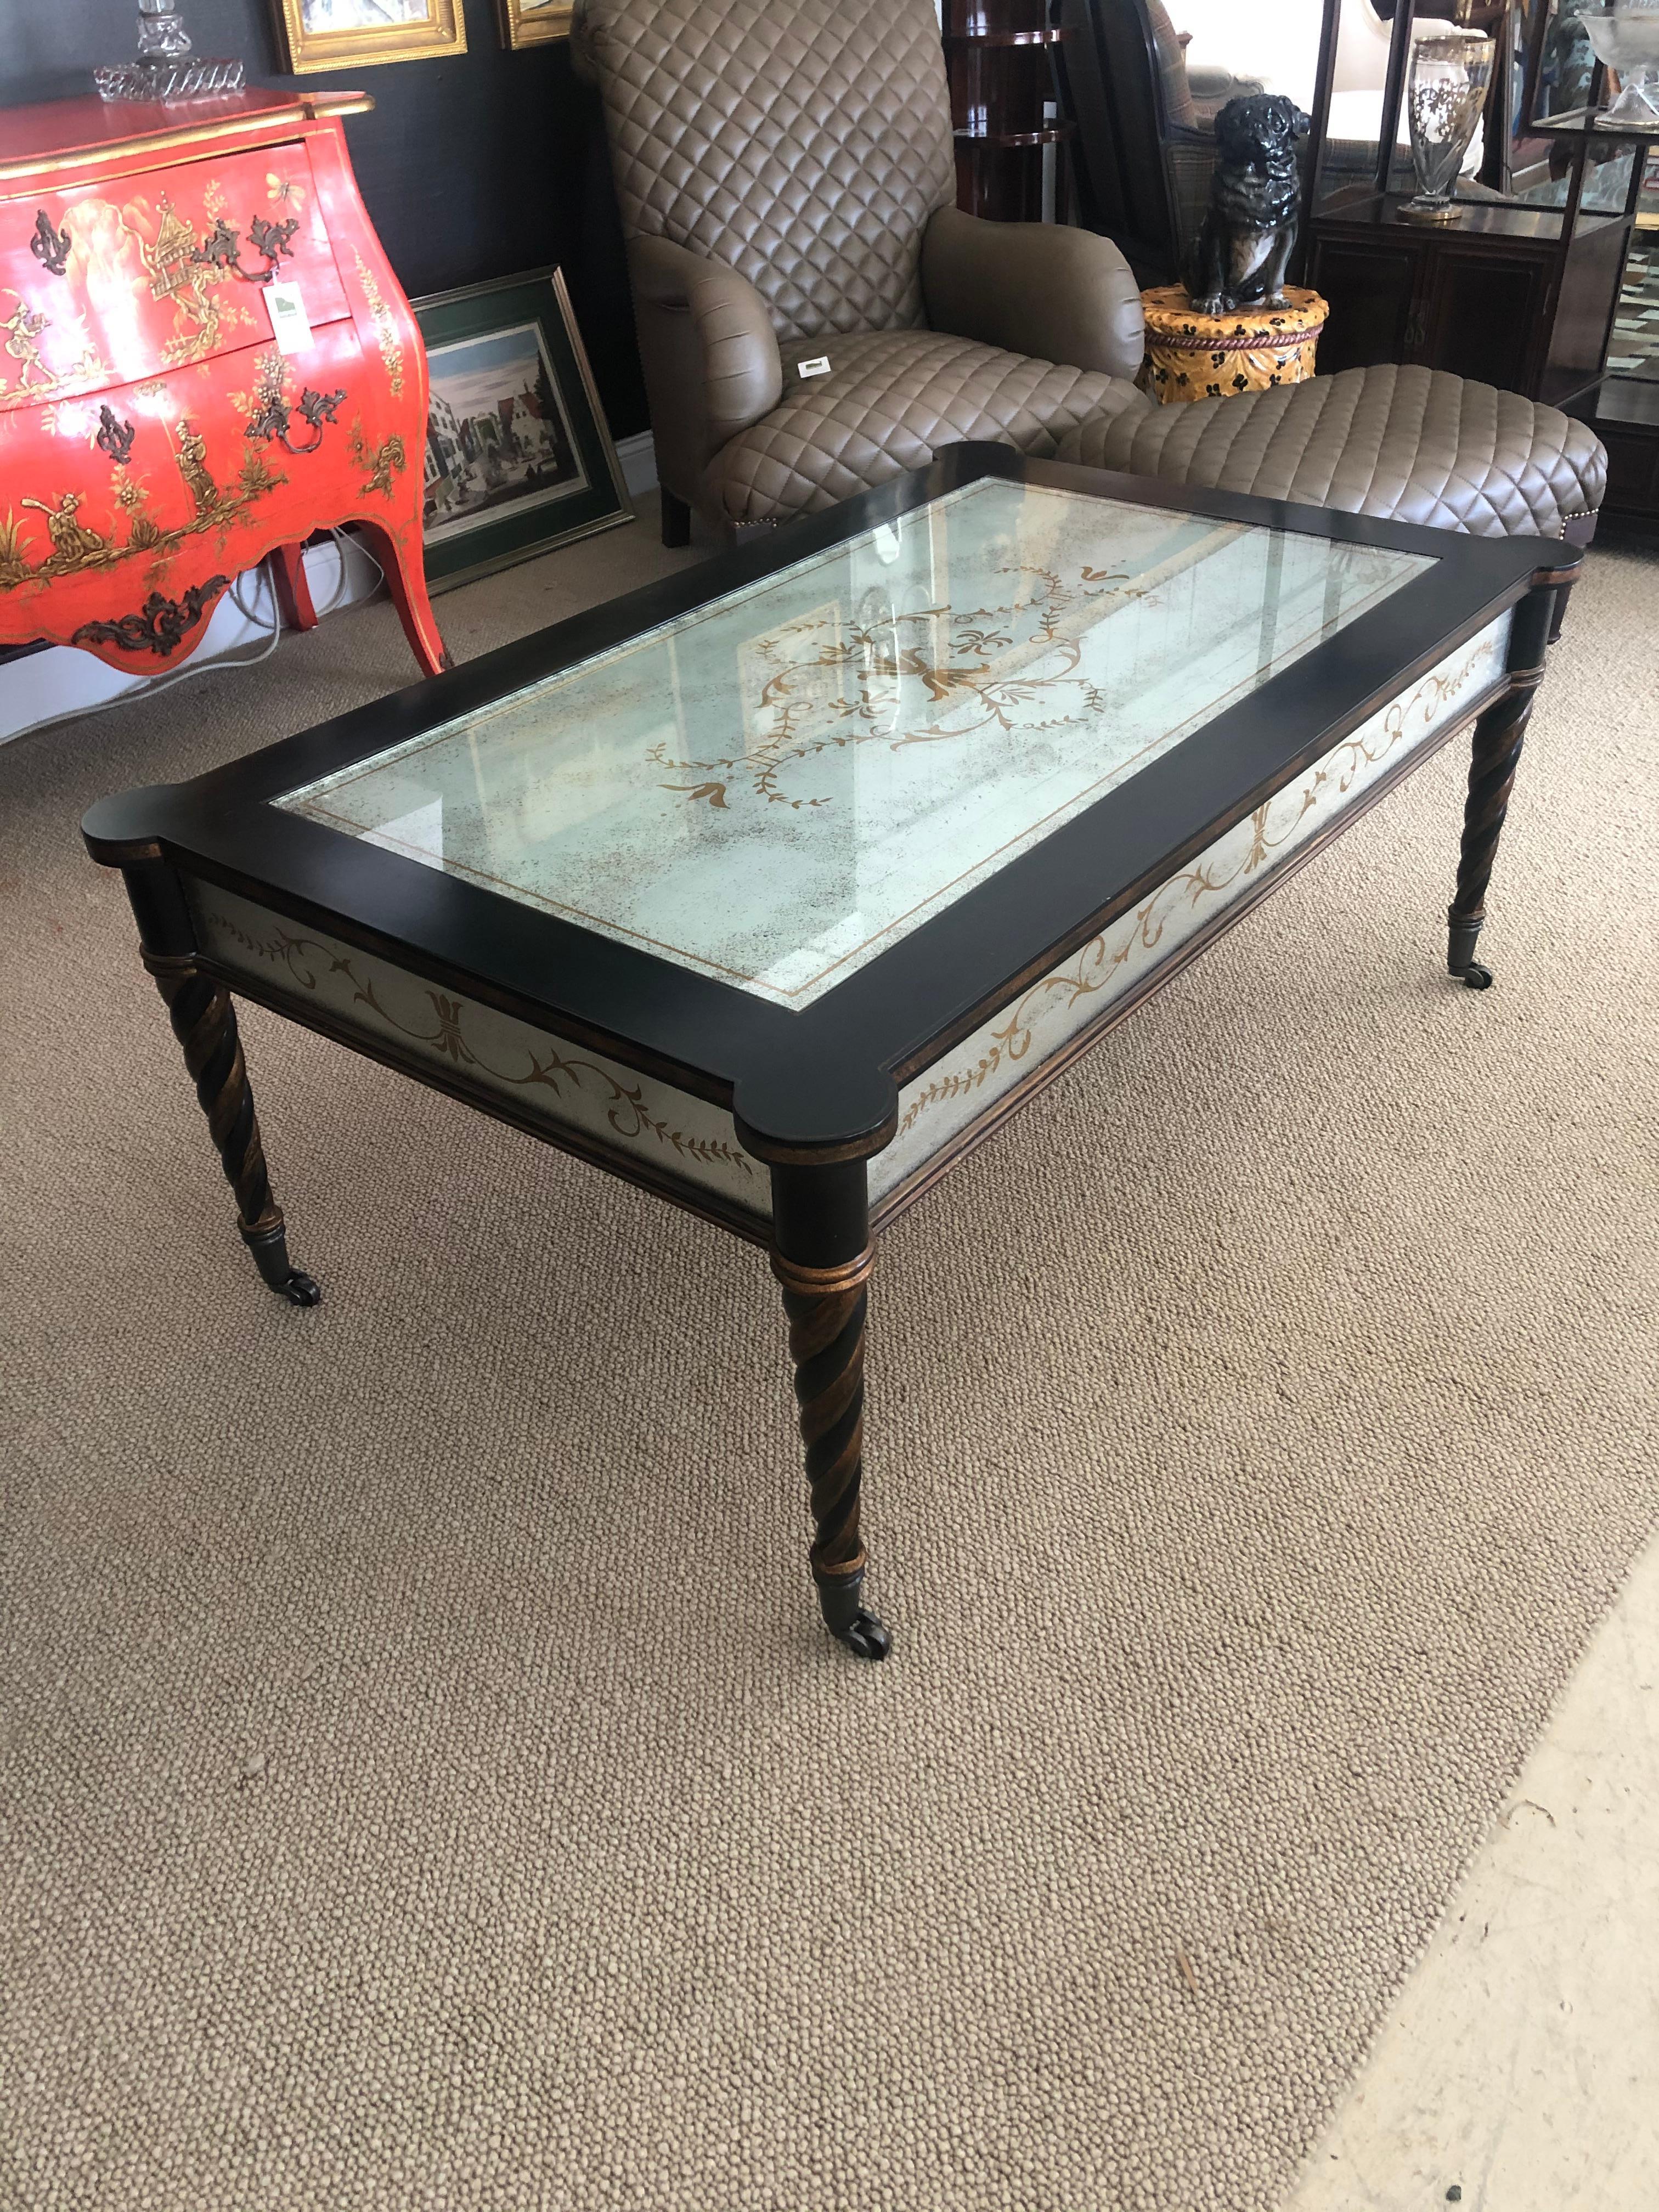 Impressive designer coffee table having ebonized base with twisted tapered legs and gorgeous églomisé mirrored inset top and sides. Legs also have gilded bronze embellishments and terminate in brass casters.